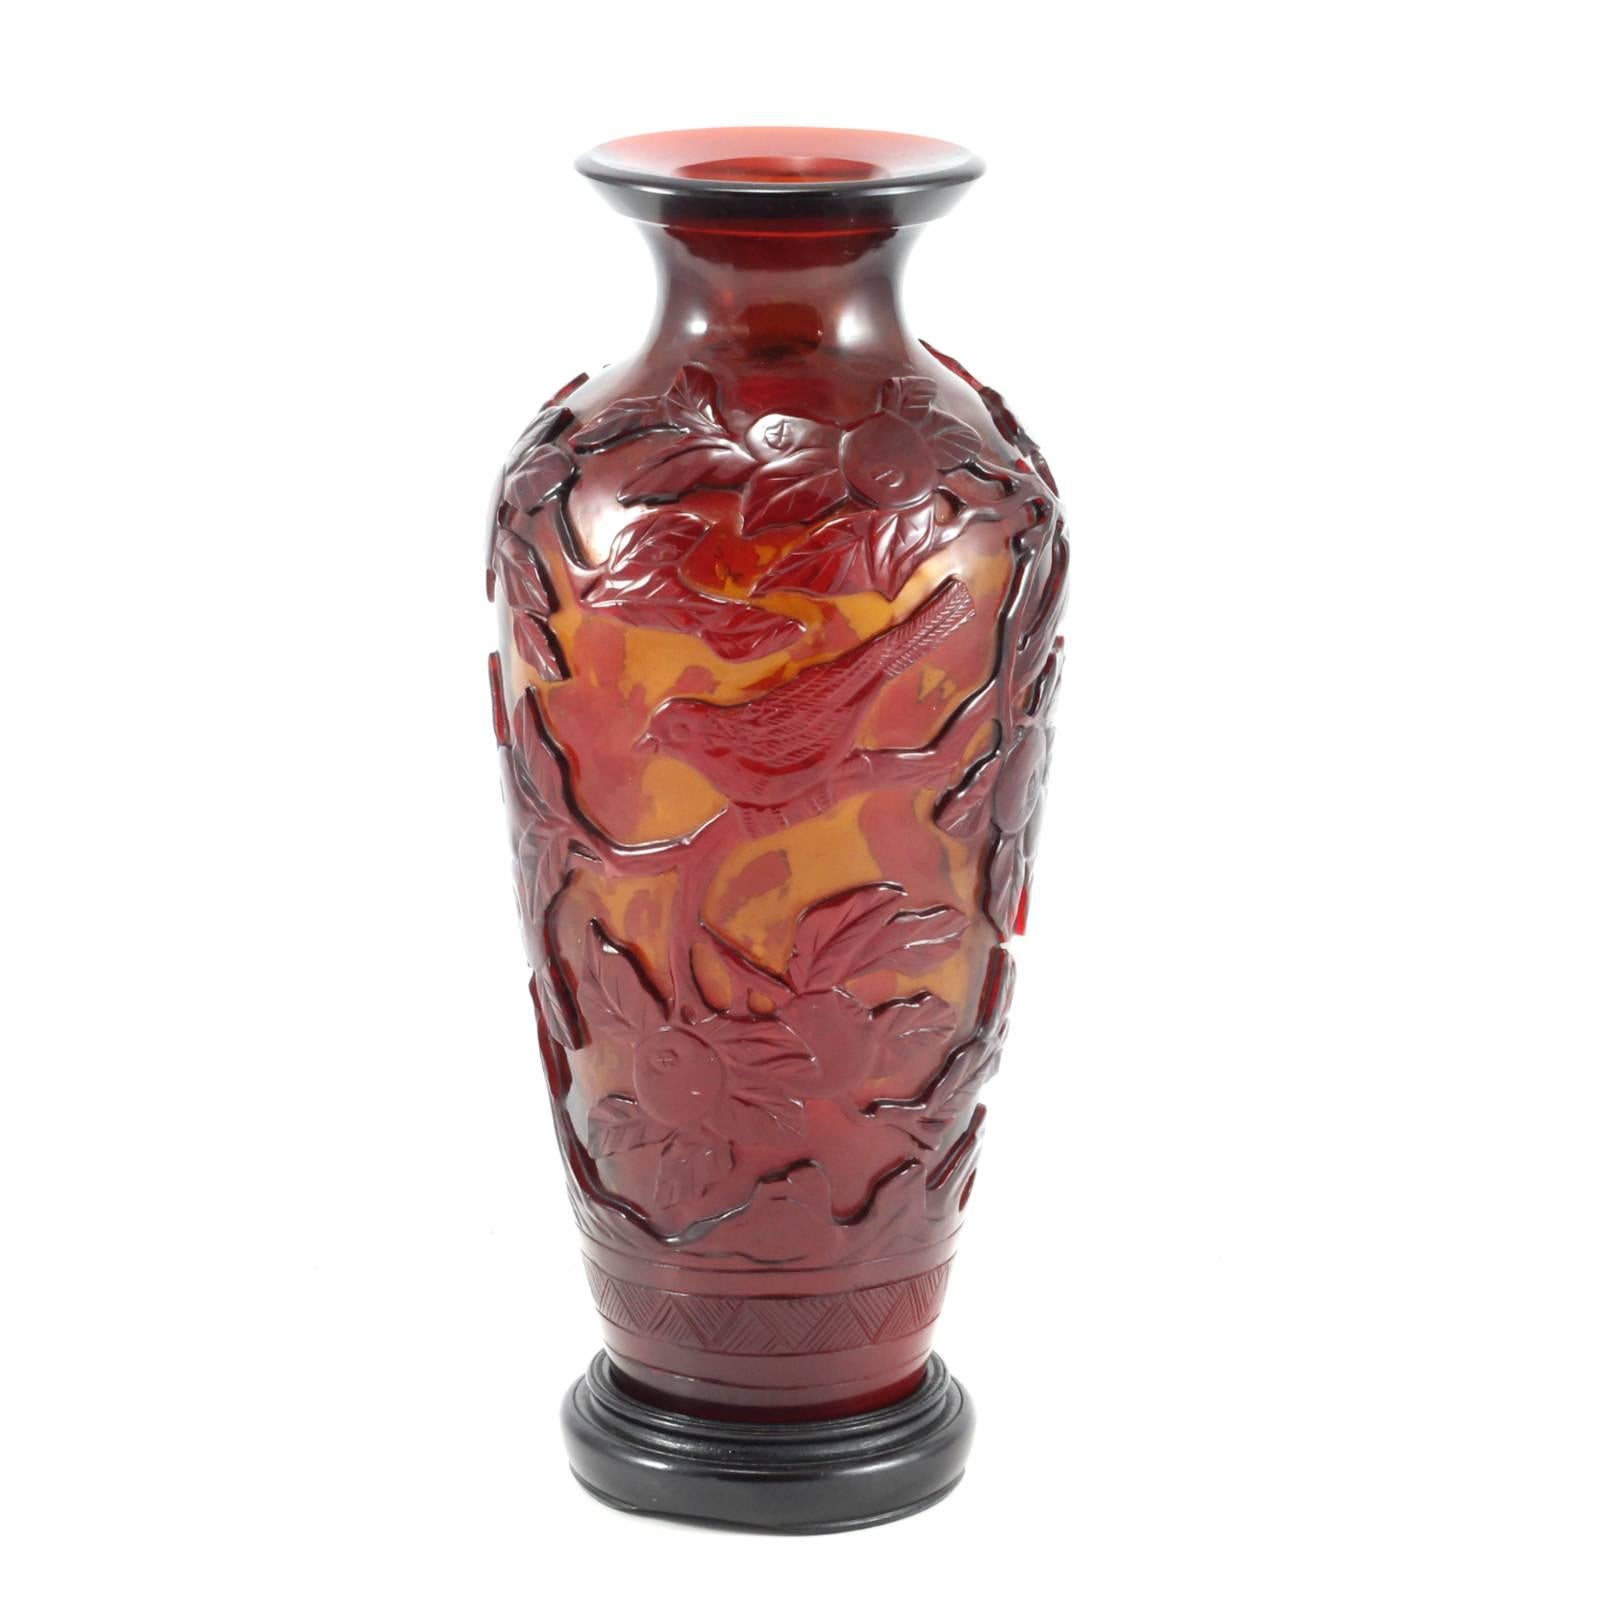 Chinese Peking glass vase featuring an amber base with scarlet glass overlay carved in a scene of birds in flight amid branches bearing pomegranate fruit. Accompanied by a fitted wooden base.